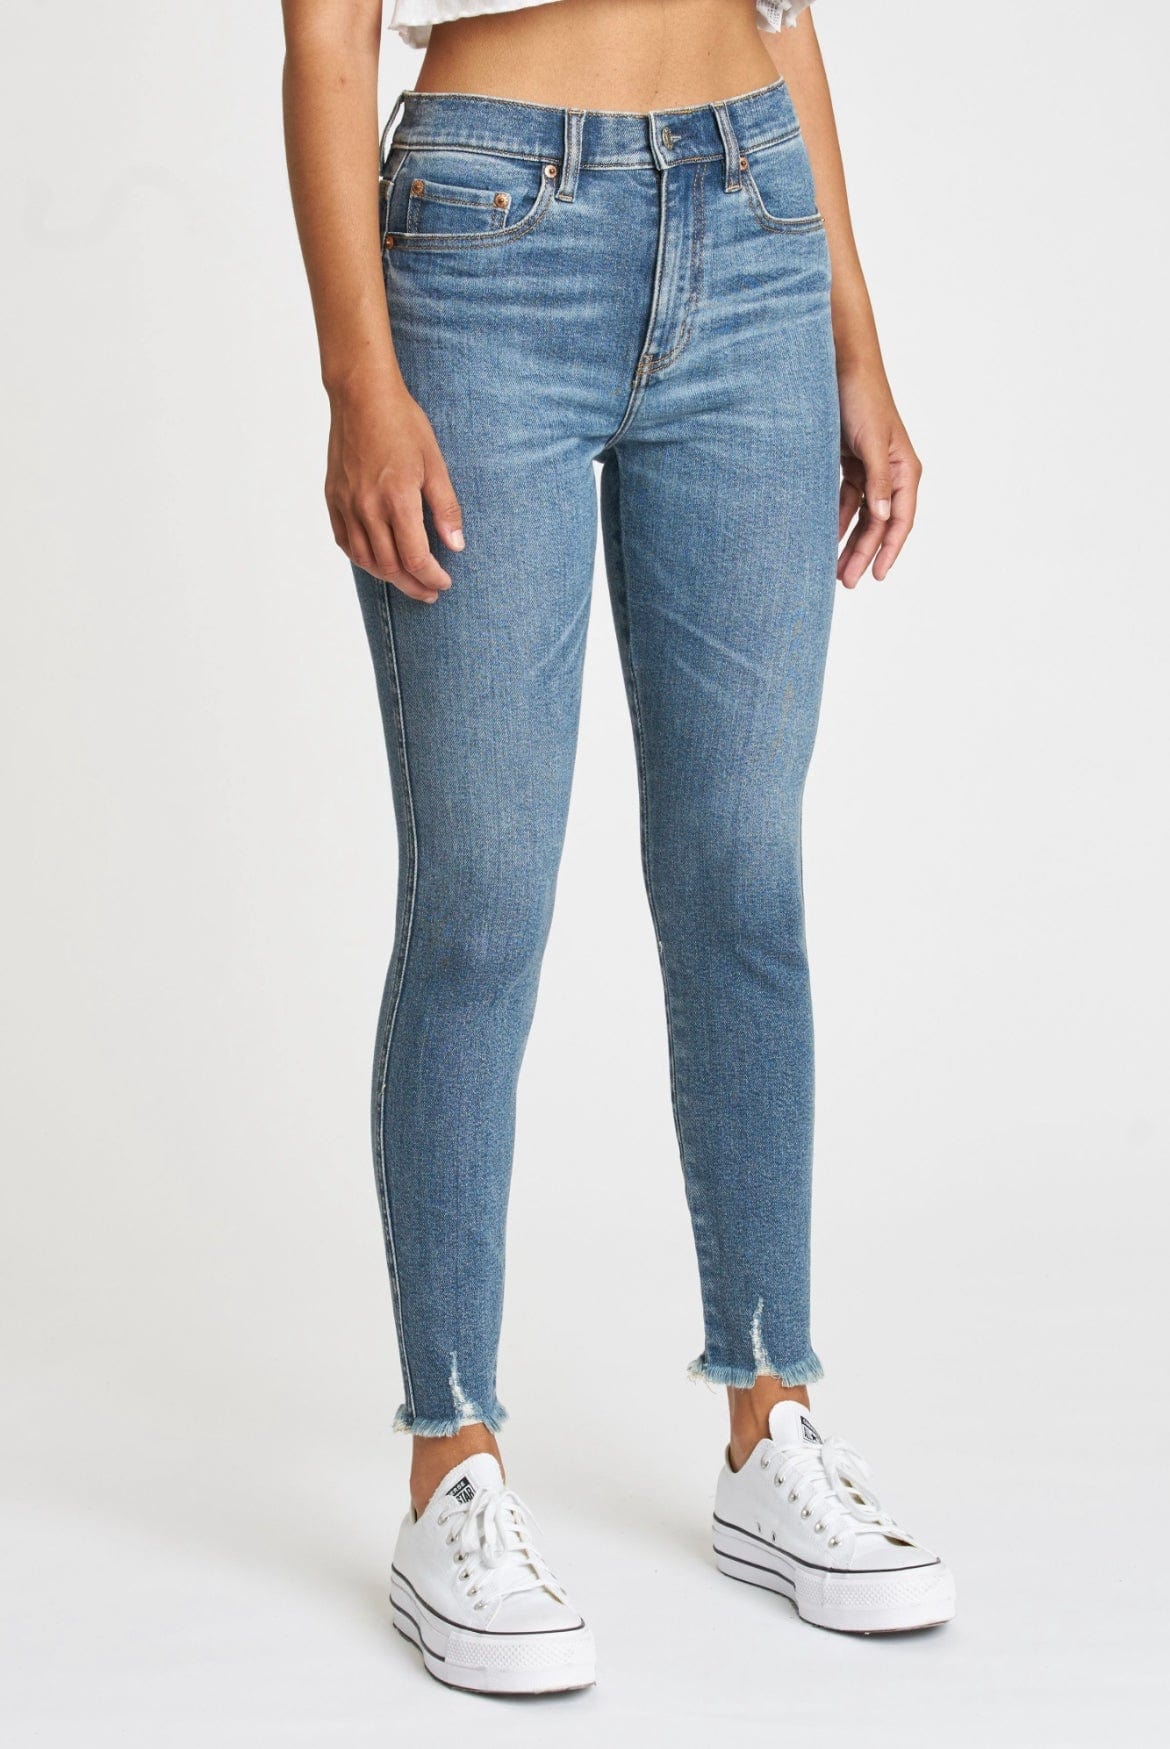 Moneymaker High Rise Skinny Jeans in Fawn - Pants - Blooming Daily